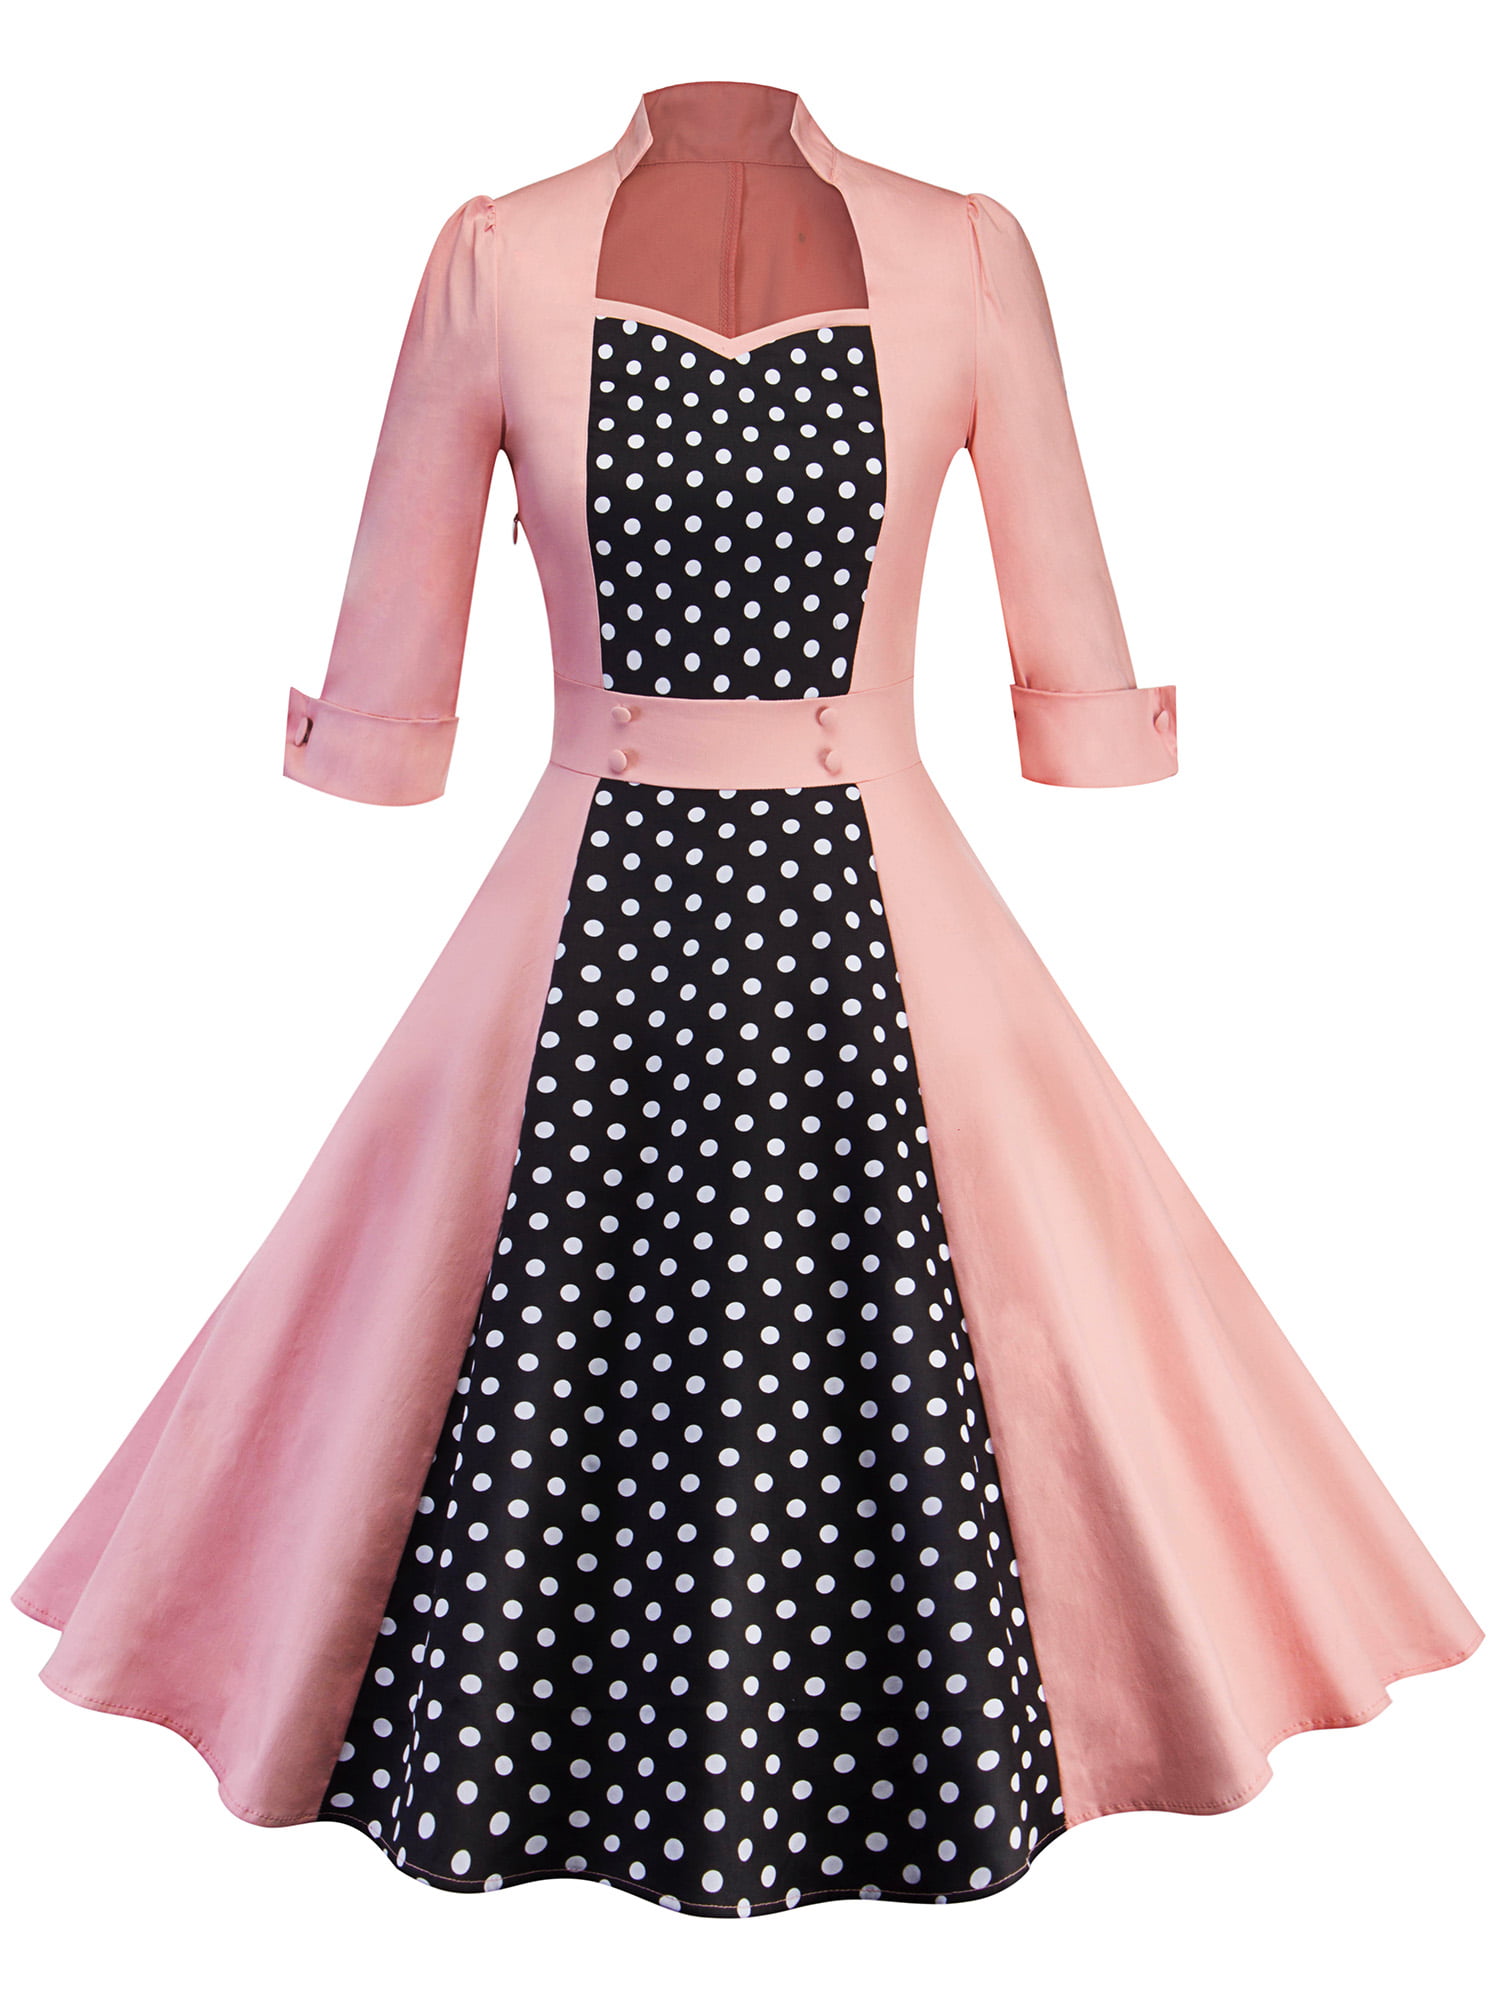 Purple Pink Polka Dot Flared 50's Vintage Style Mini Party Prom Dress New 8-16 